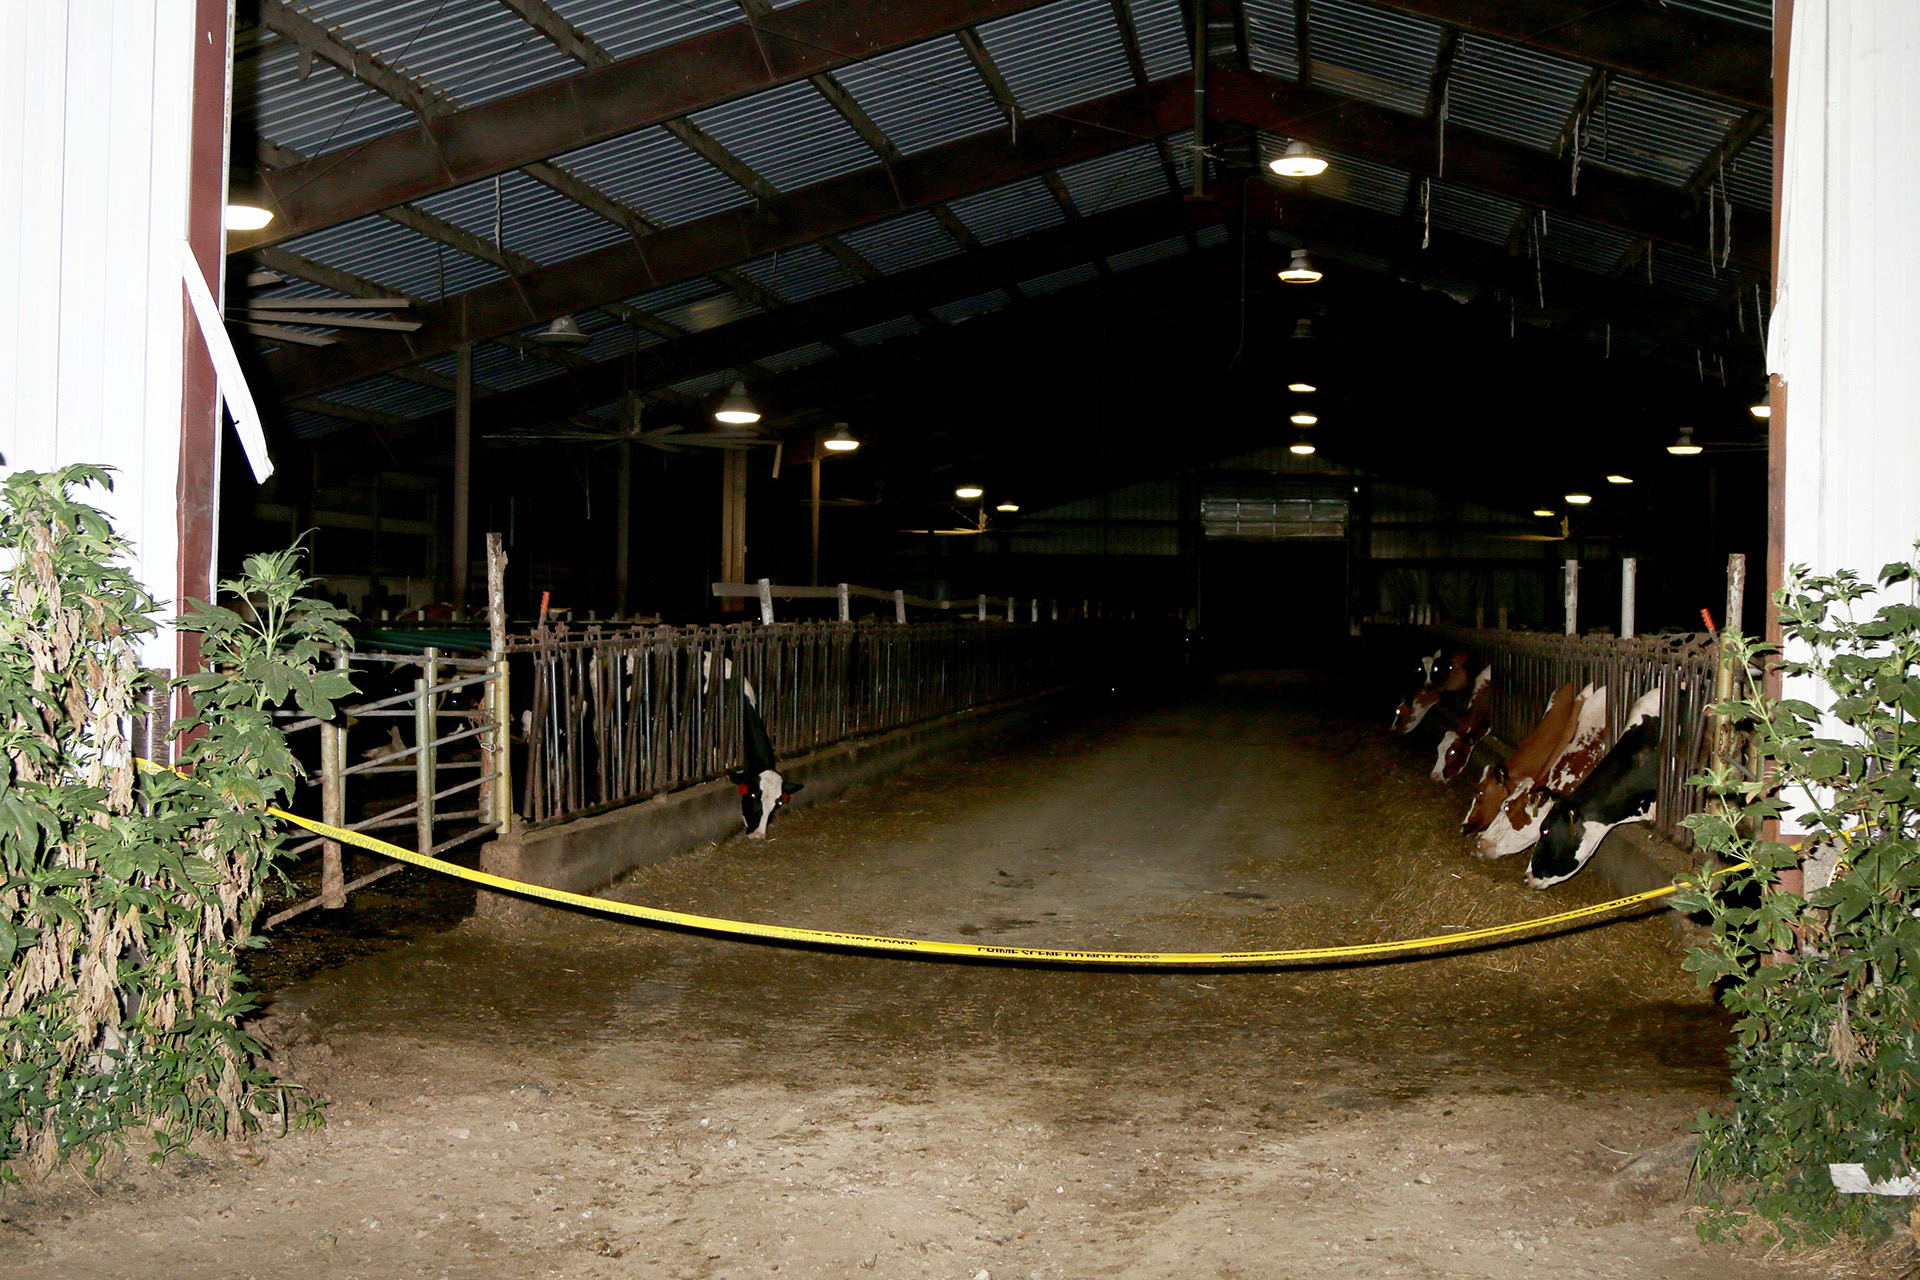 A barricade tape is draped across the vehicle-sized entrance to a dairy barn, with cows feeding in stalls on either side of the lane.